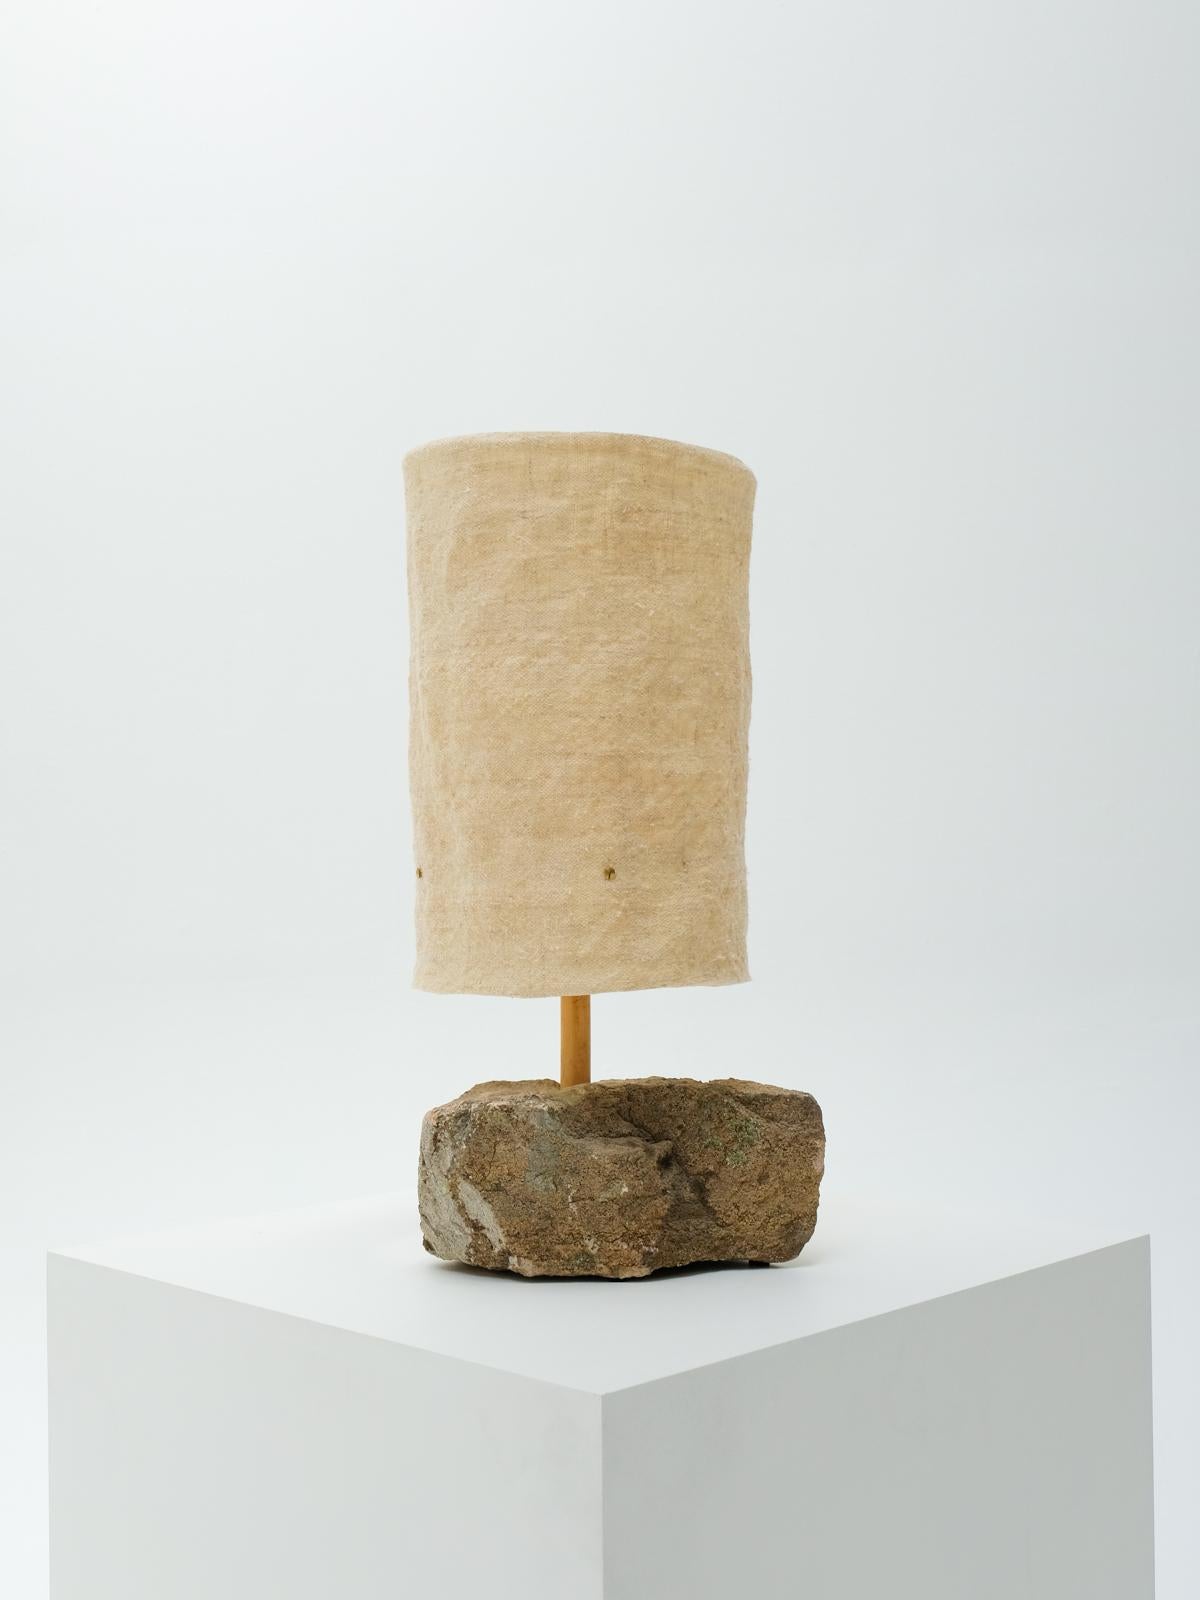 Hjra Table Lamp Large, Handspun, Handwoven wool Lampshade, Made of Rock & Reed For Sale 1